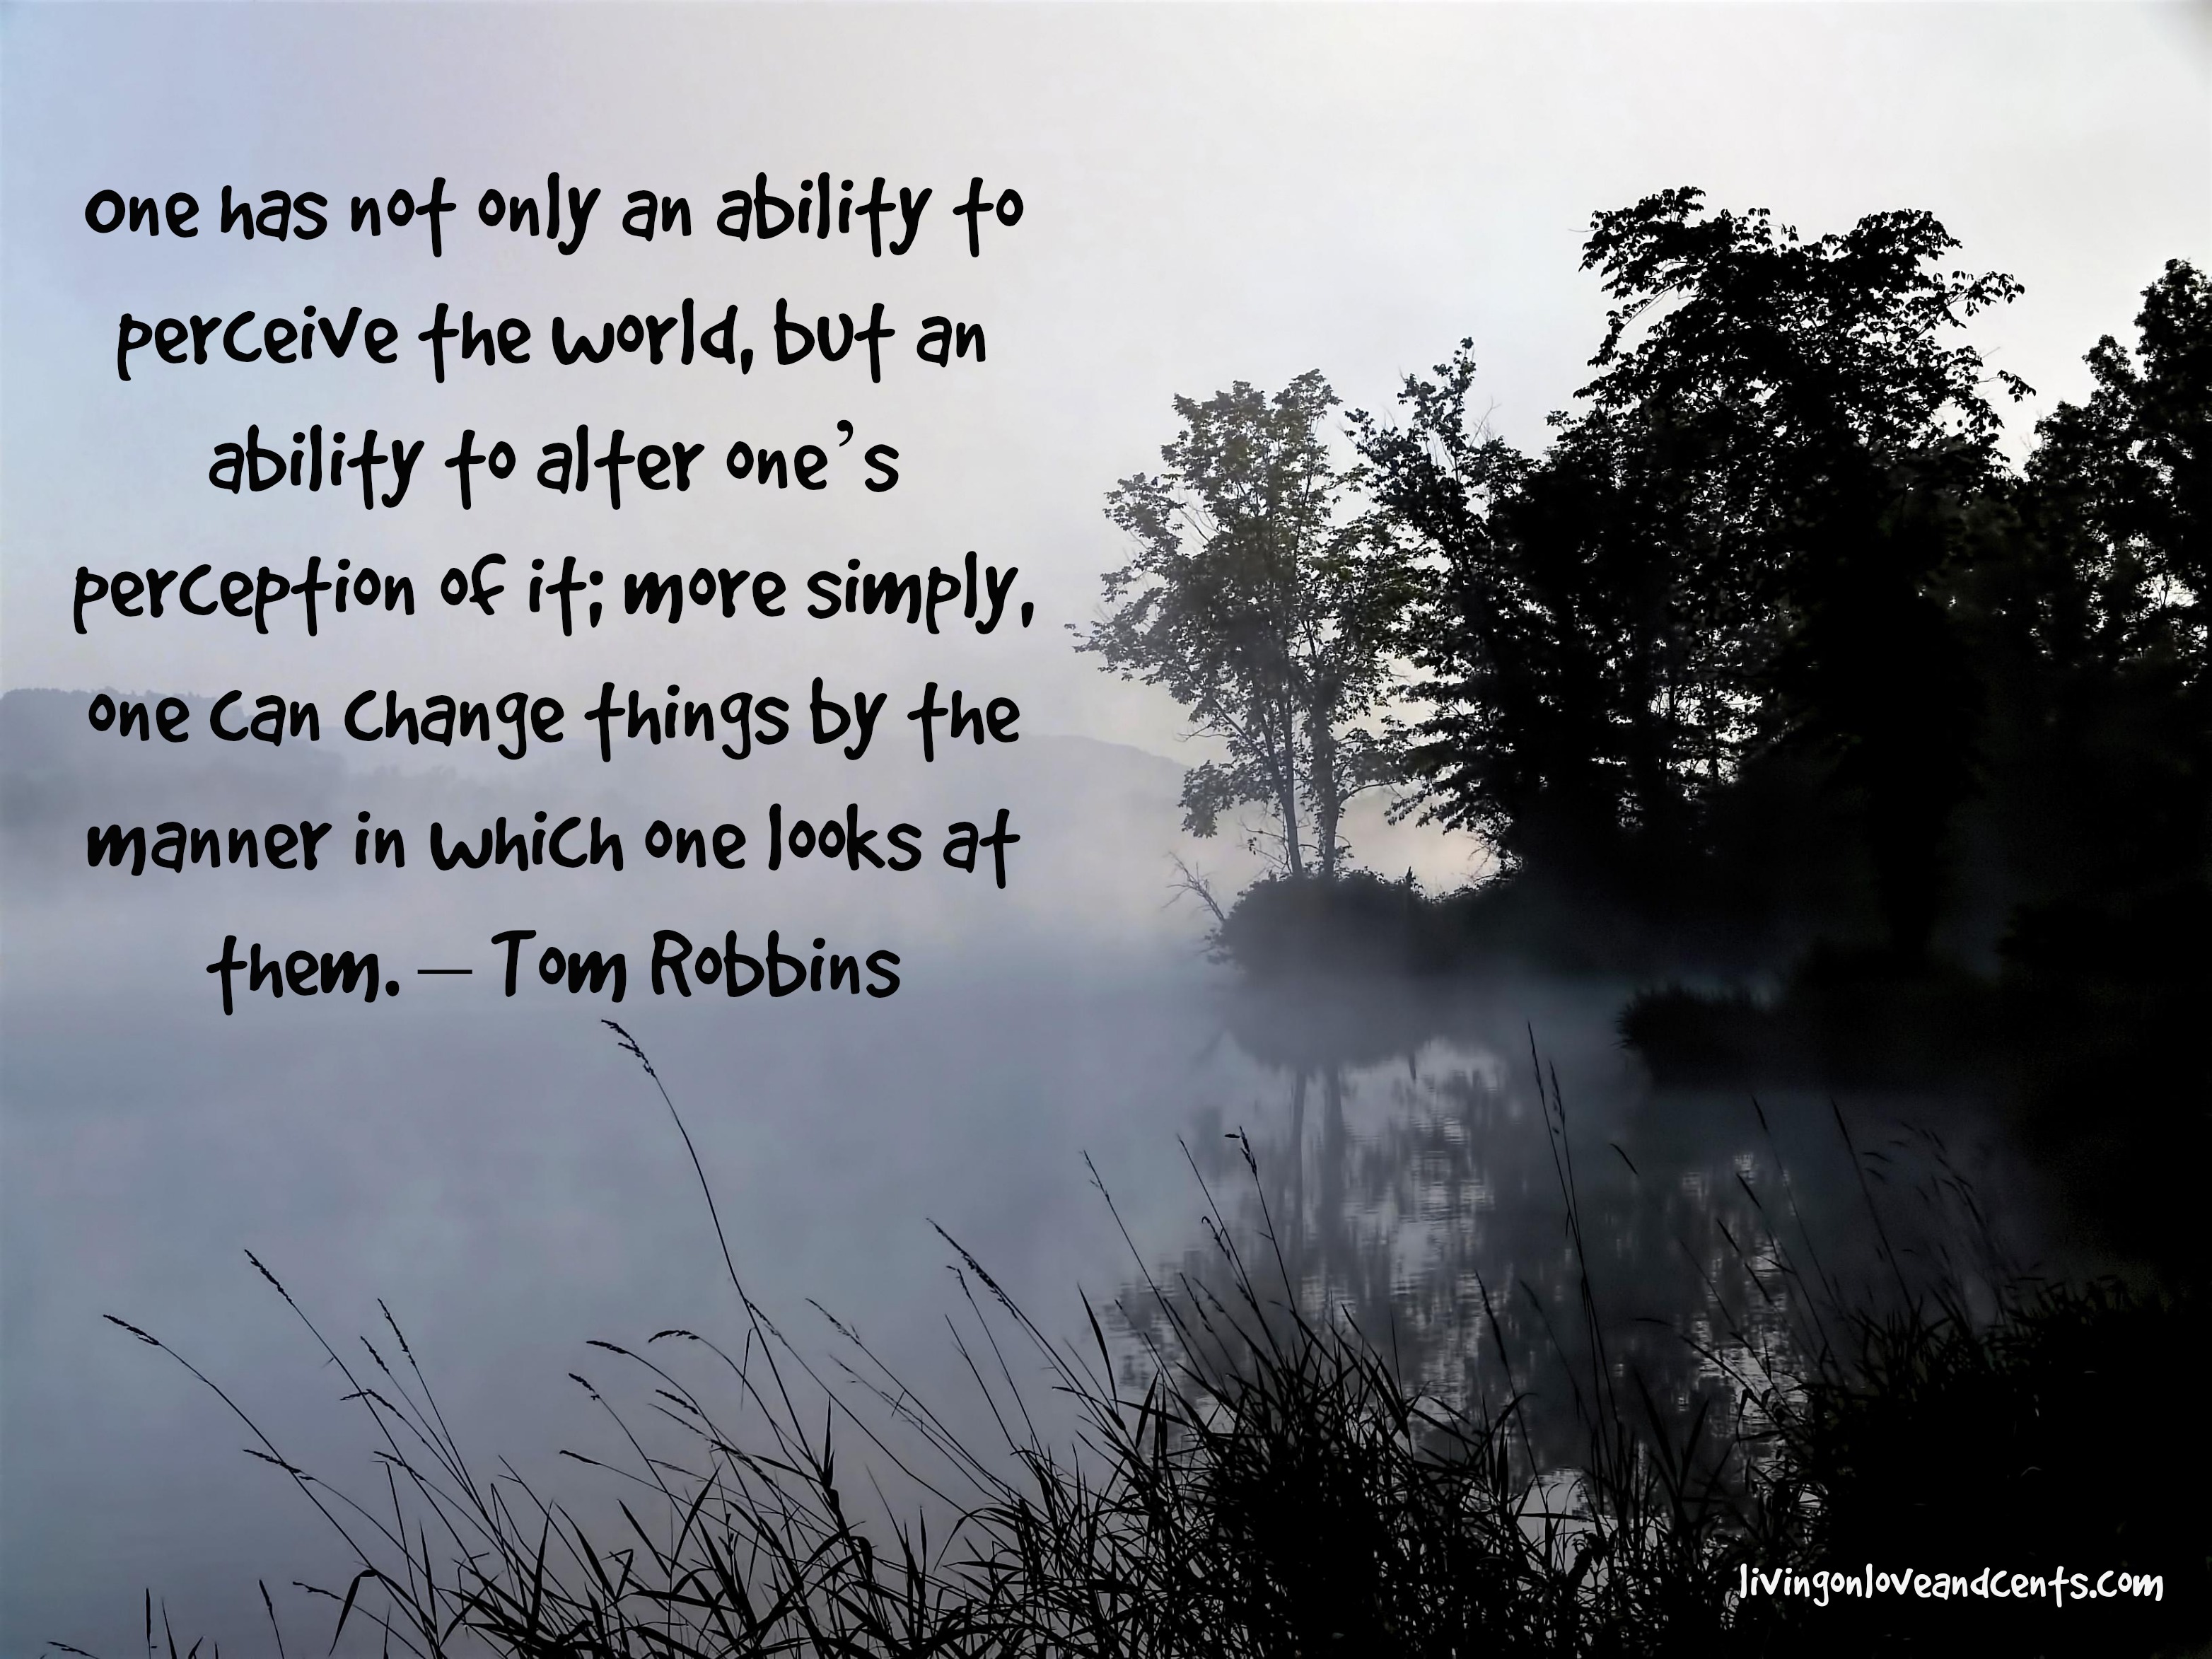 One has not only an ability to perceive the world, but an ability to alter one’s perception of it more simply, one can change things by the manner in which one … Tom RObbins